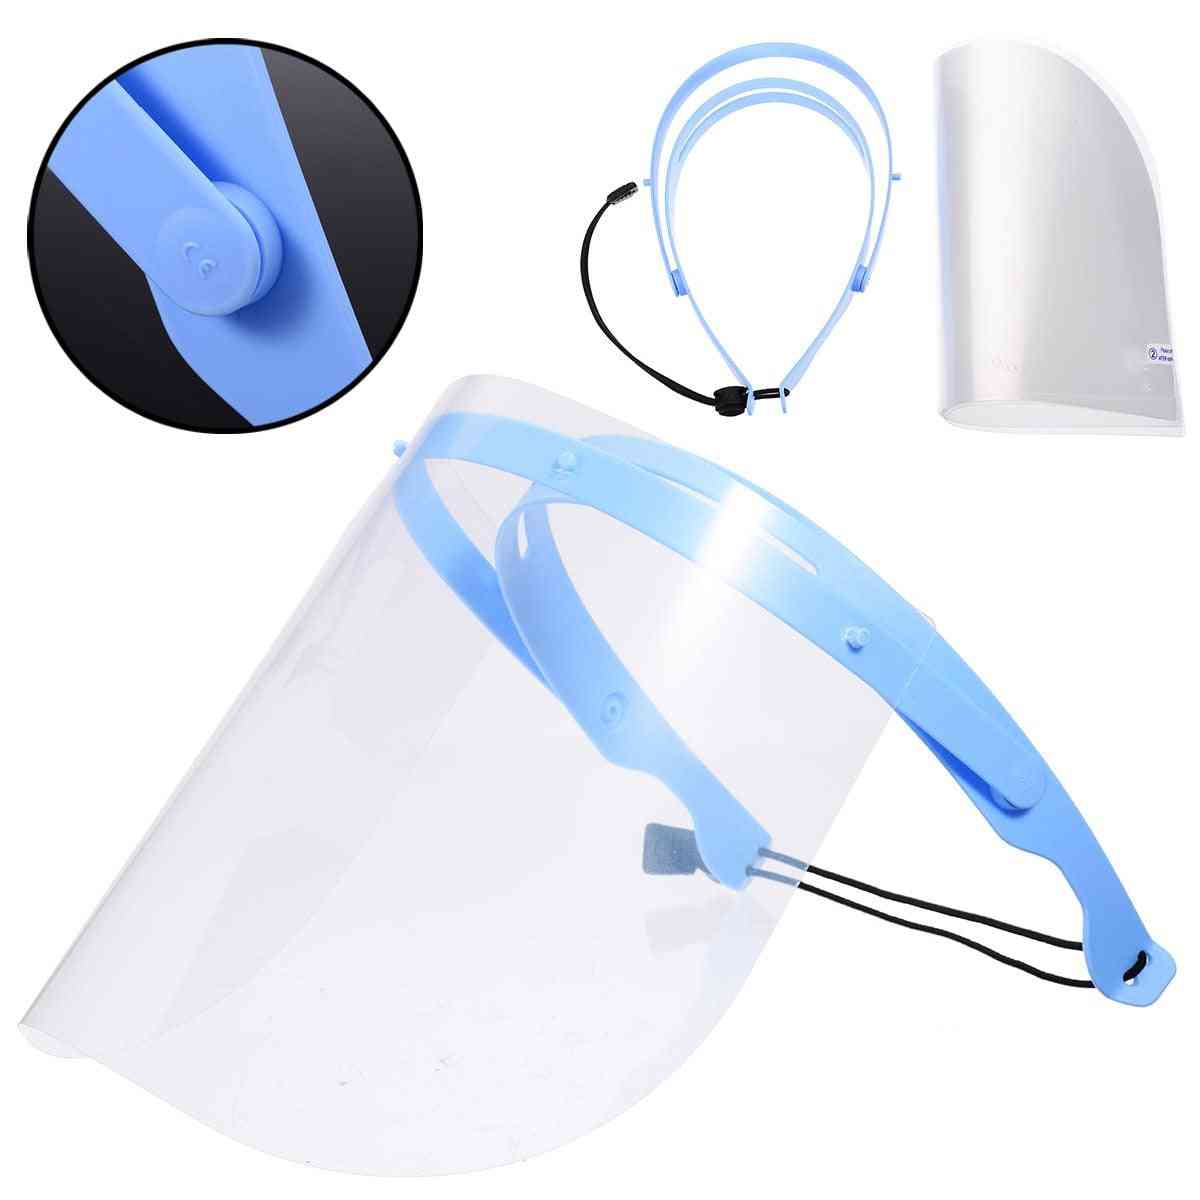 Adjustable Full Face Shield With Clear Detachable Visors